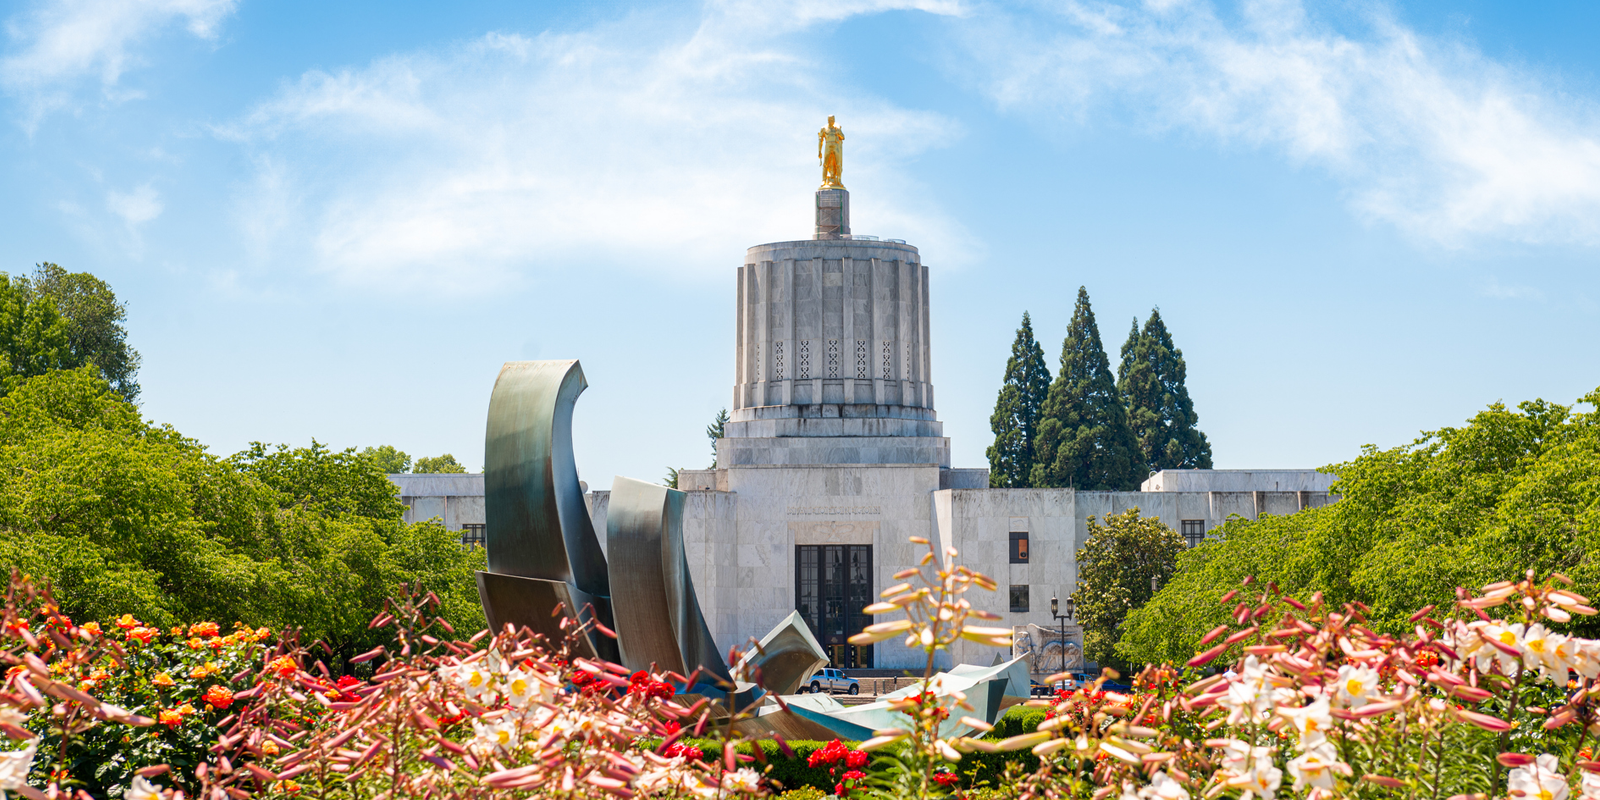 Stock image of Oregon Pioneer on top of the Oregon State Capitol. Photo credit: Sean Pavone/iStock